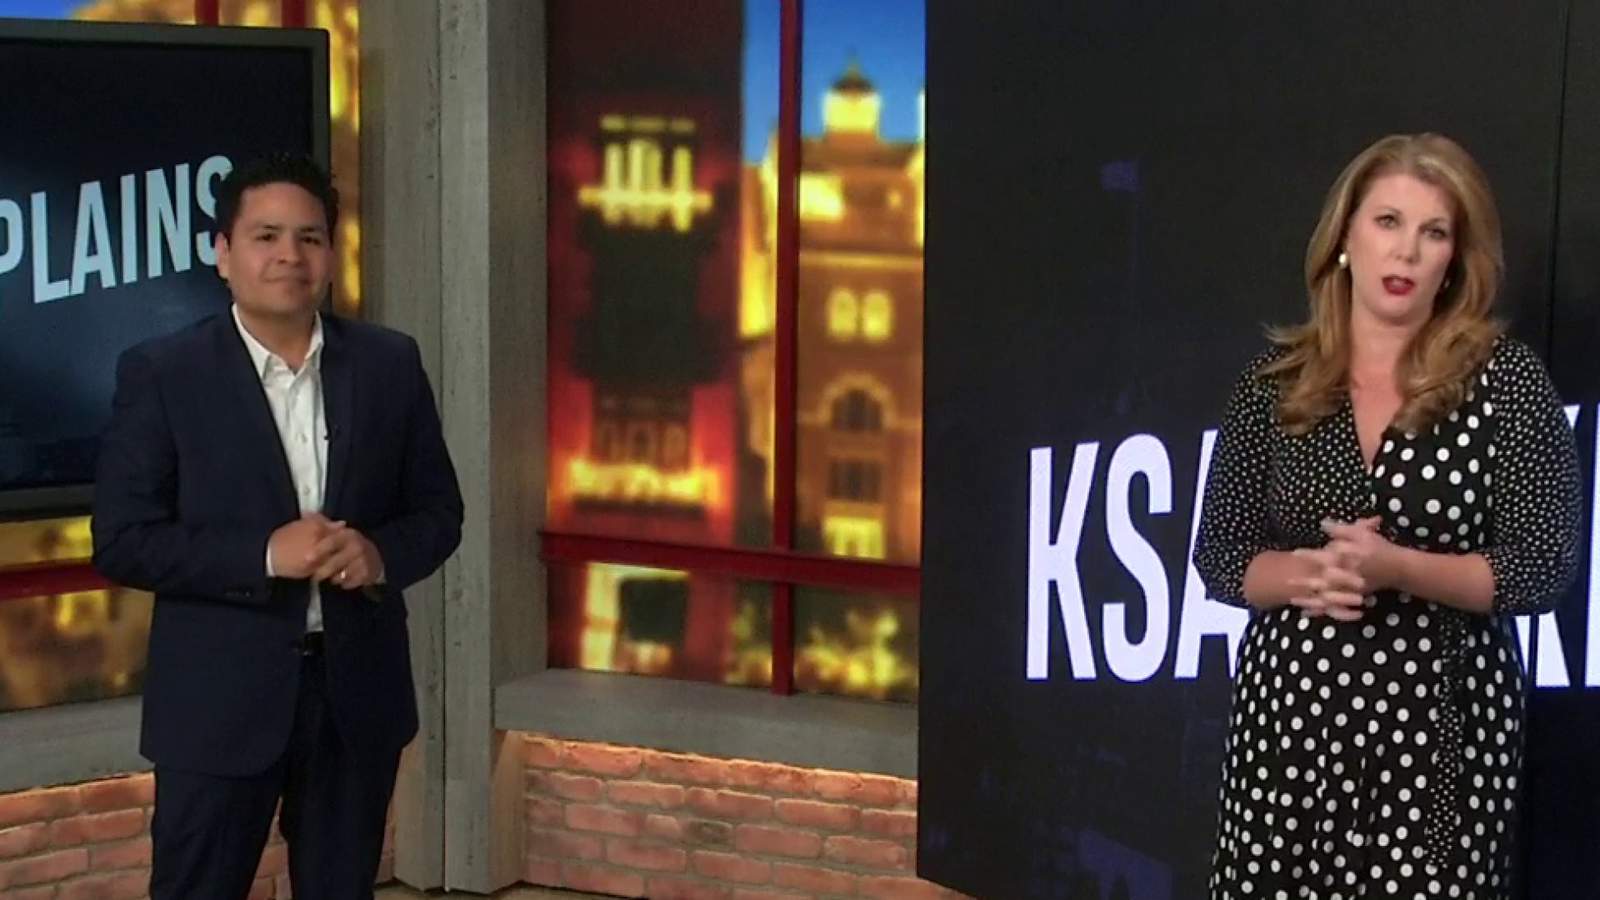 GMSA@9 Debrief: An introduction to ‘KSAT Explains’, a new weekly show covering the biggest issues in San Antonio